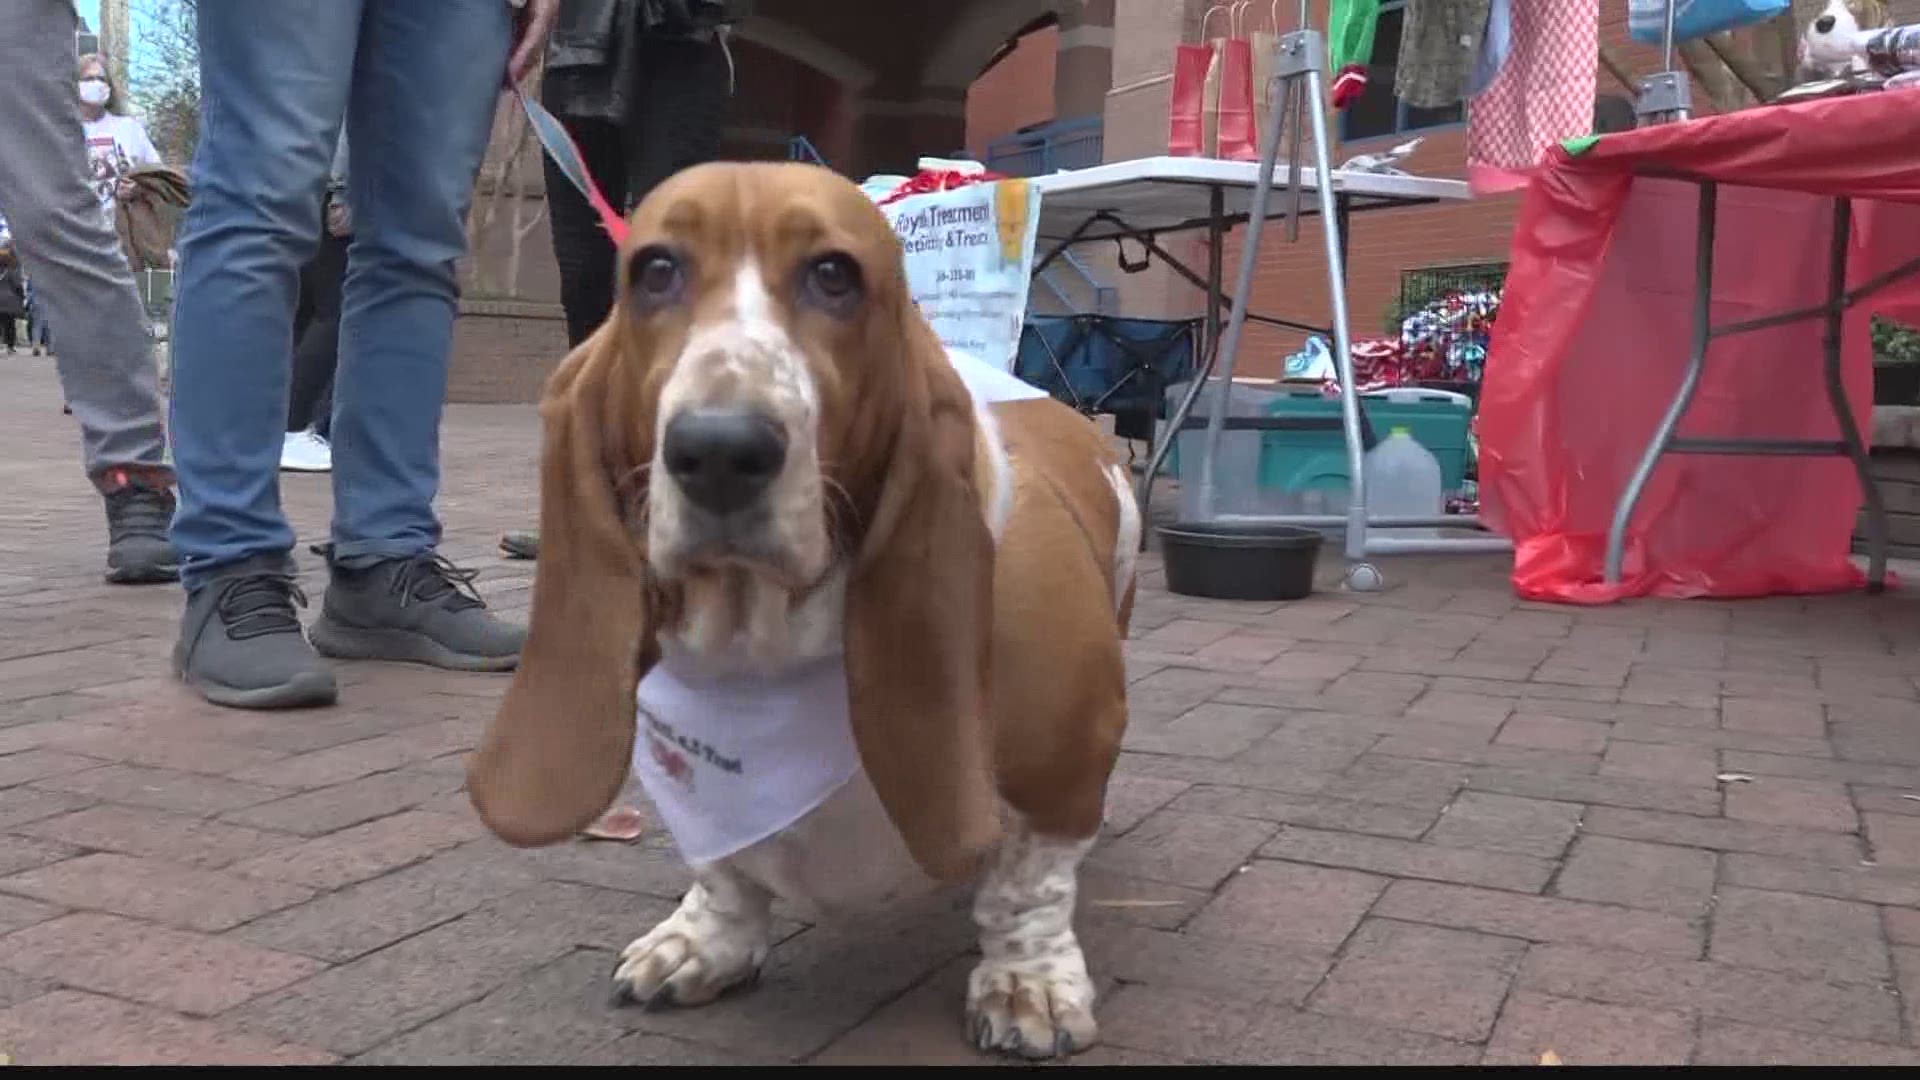 An abundance of Basset Hounds showed up at Big Spring Park to strut their stuff. Oh, and their owners happened to be there too.